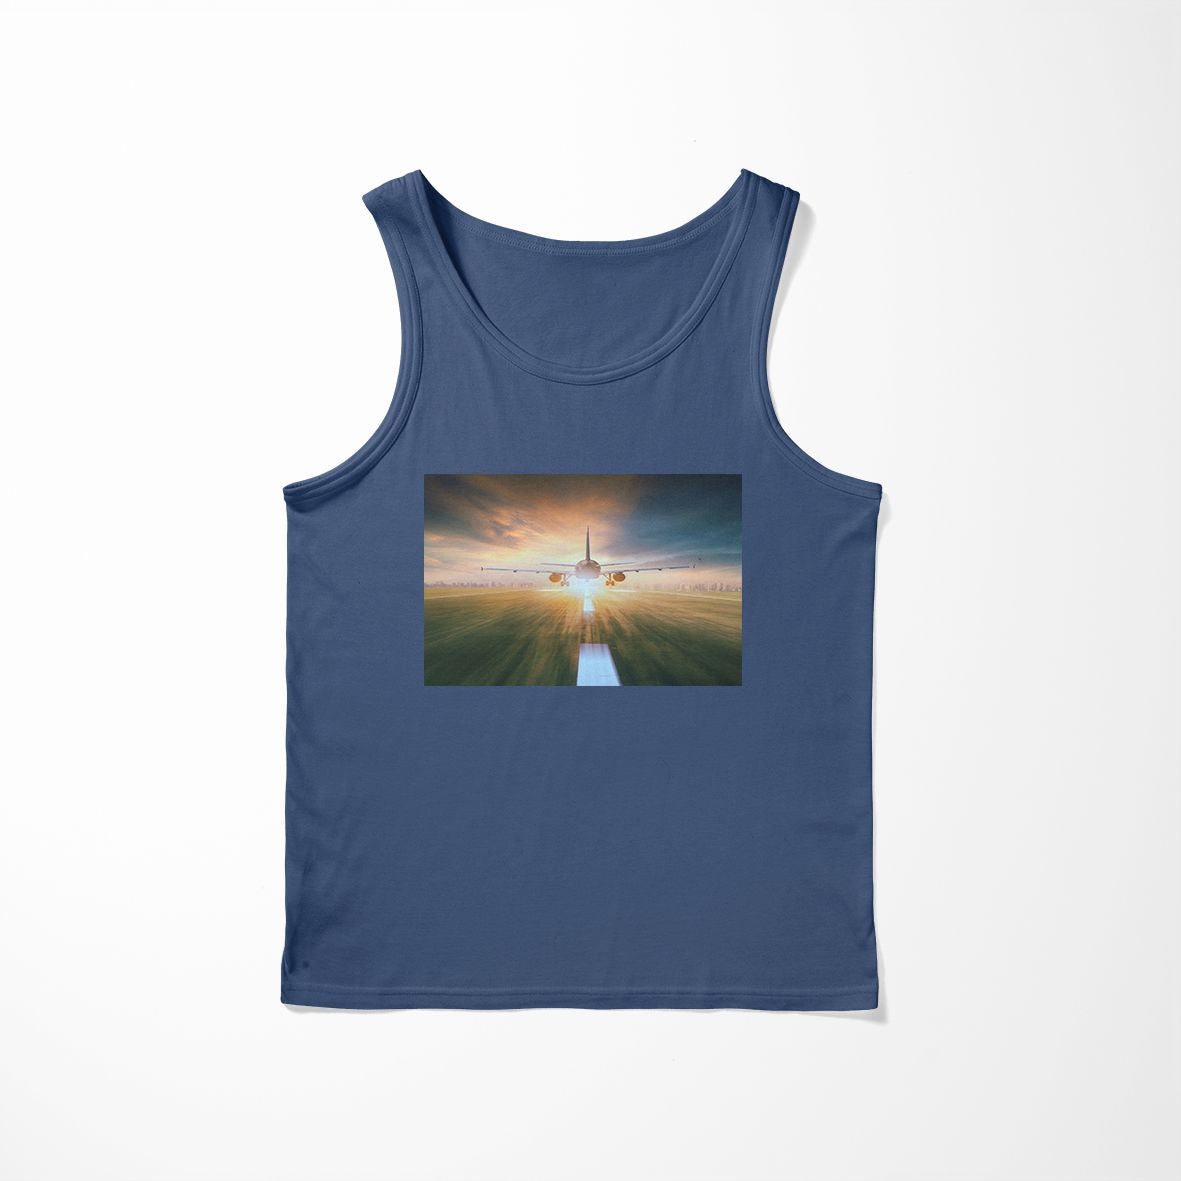 Airplane Flying Over Runway Designed Tank Tops